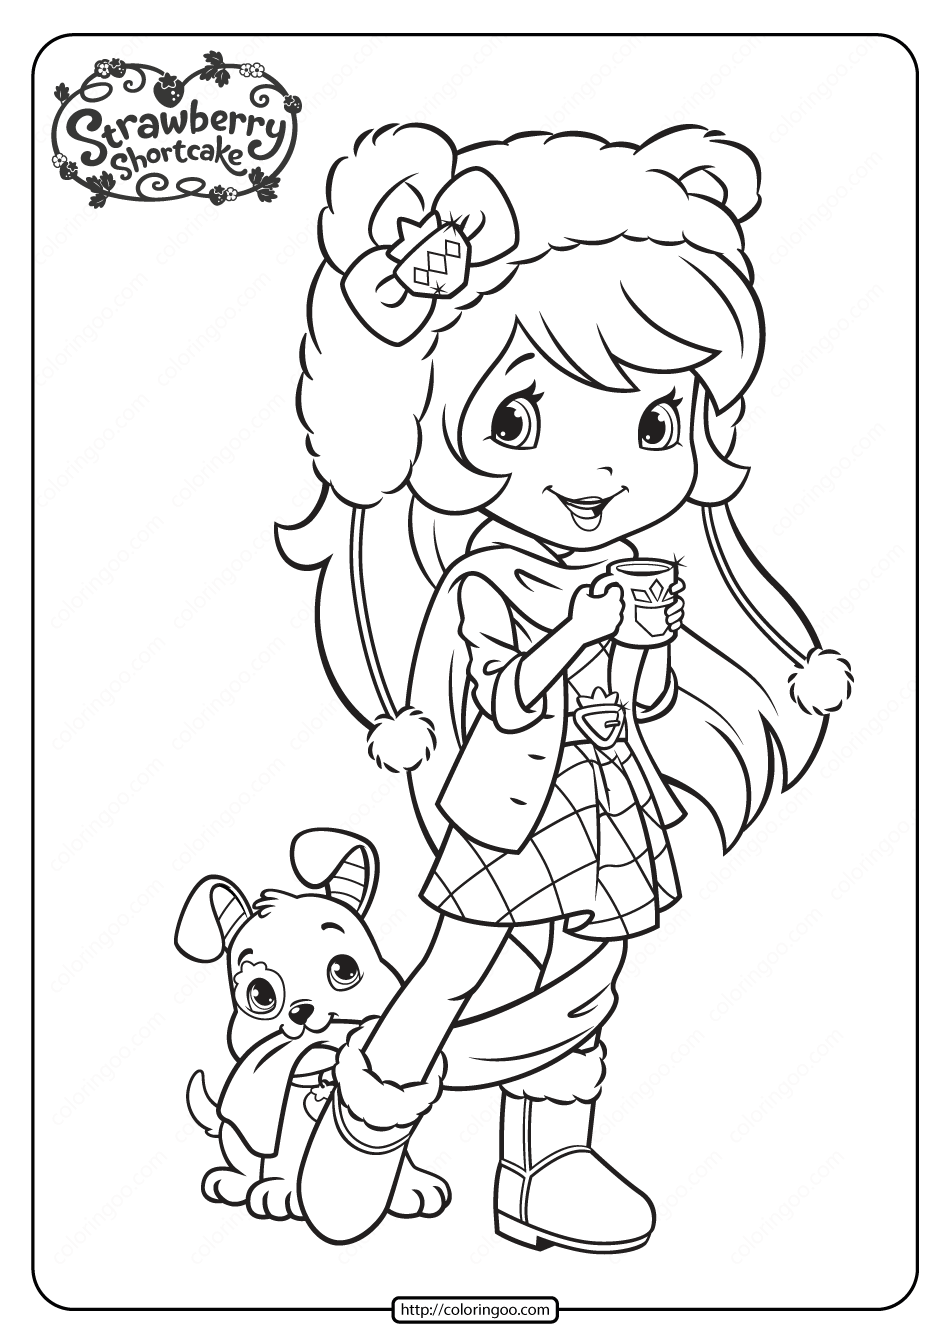 Printable Strawberry Shortcake Coloring Pages – 15